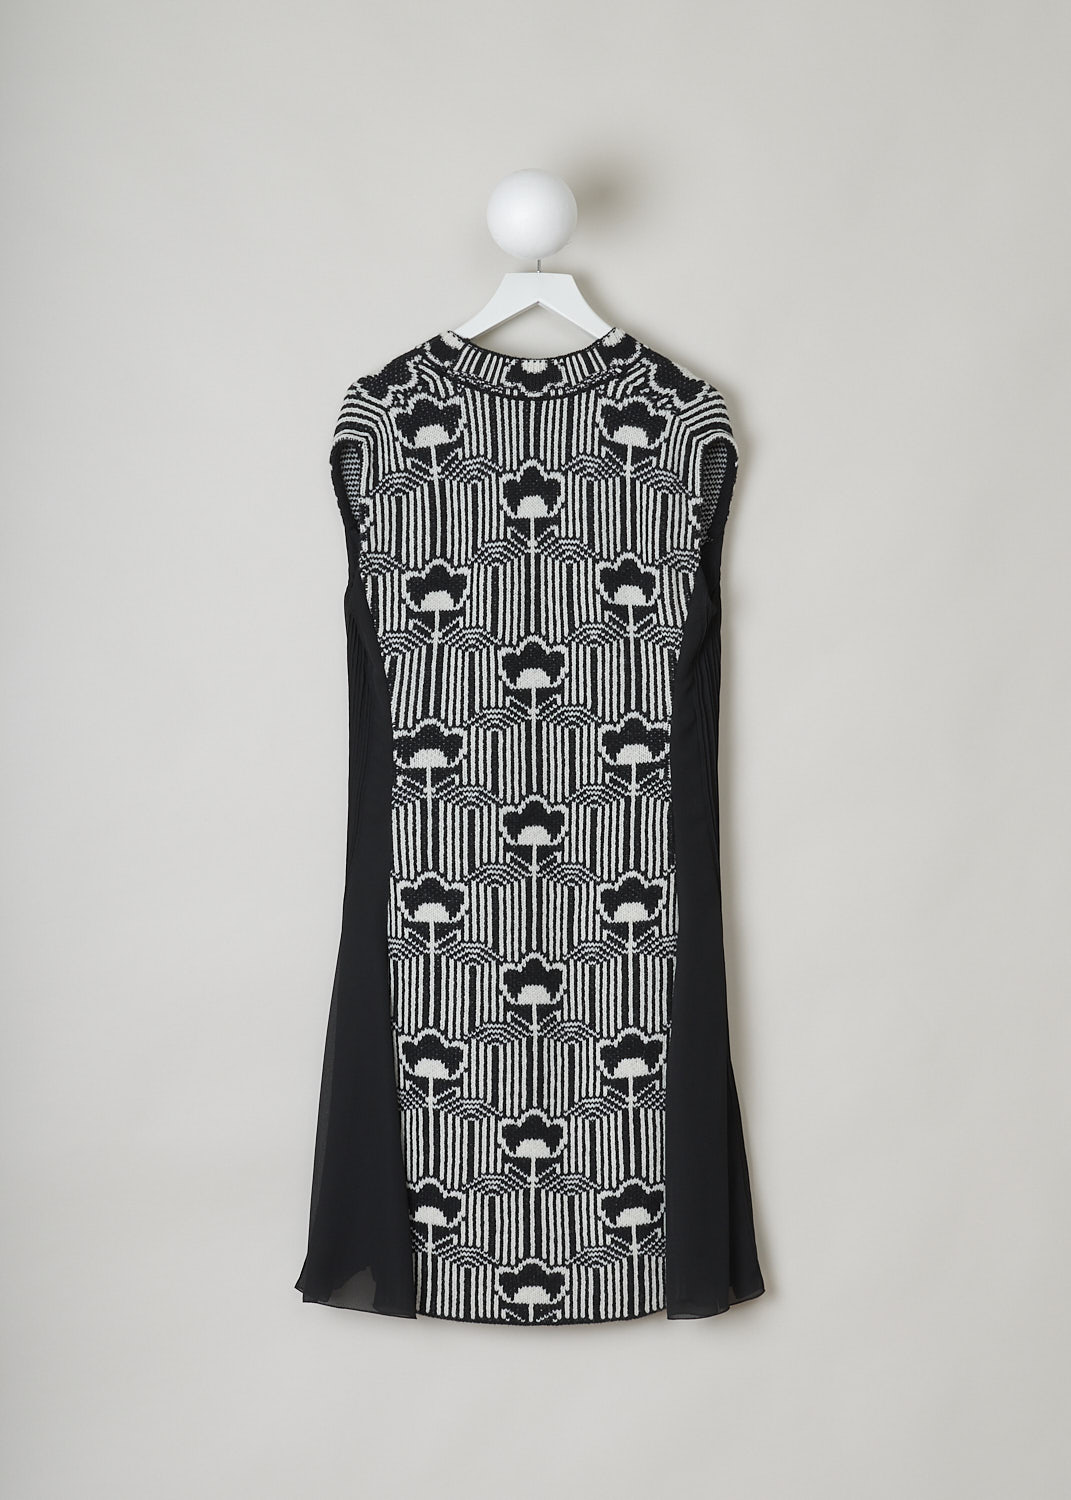 PRADA, BLACK AND WHITE JACQUARD DRESS, P3F95_F0967_JACQUARD_GEORGE_NERO_BLANC, Front, Back, White, Print, This sleeveless slip-on dress is made in a black and white knitted floral-jacquard print. The dress has black pleated inserts on either side. The V-neckline has a ribbed finish. The dress has a below-the-knee length. 
